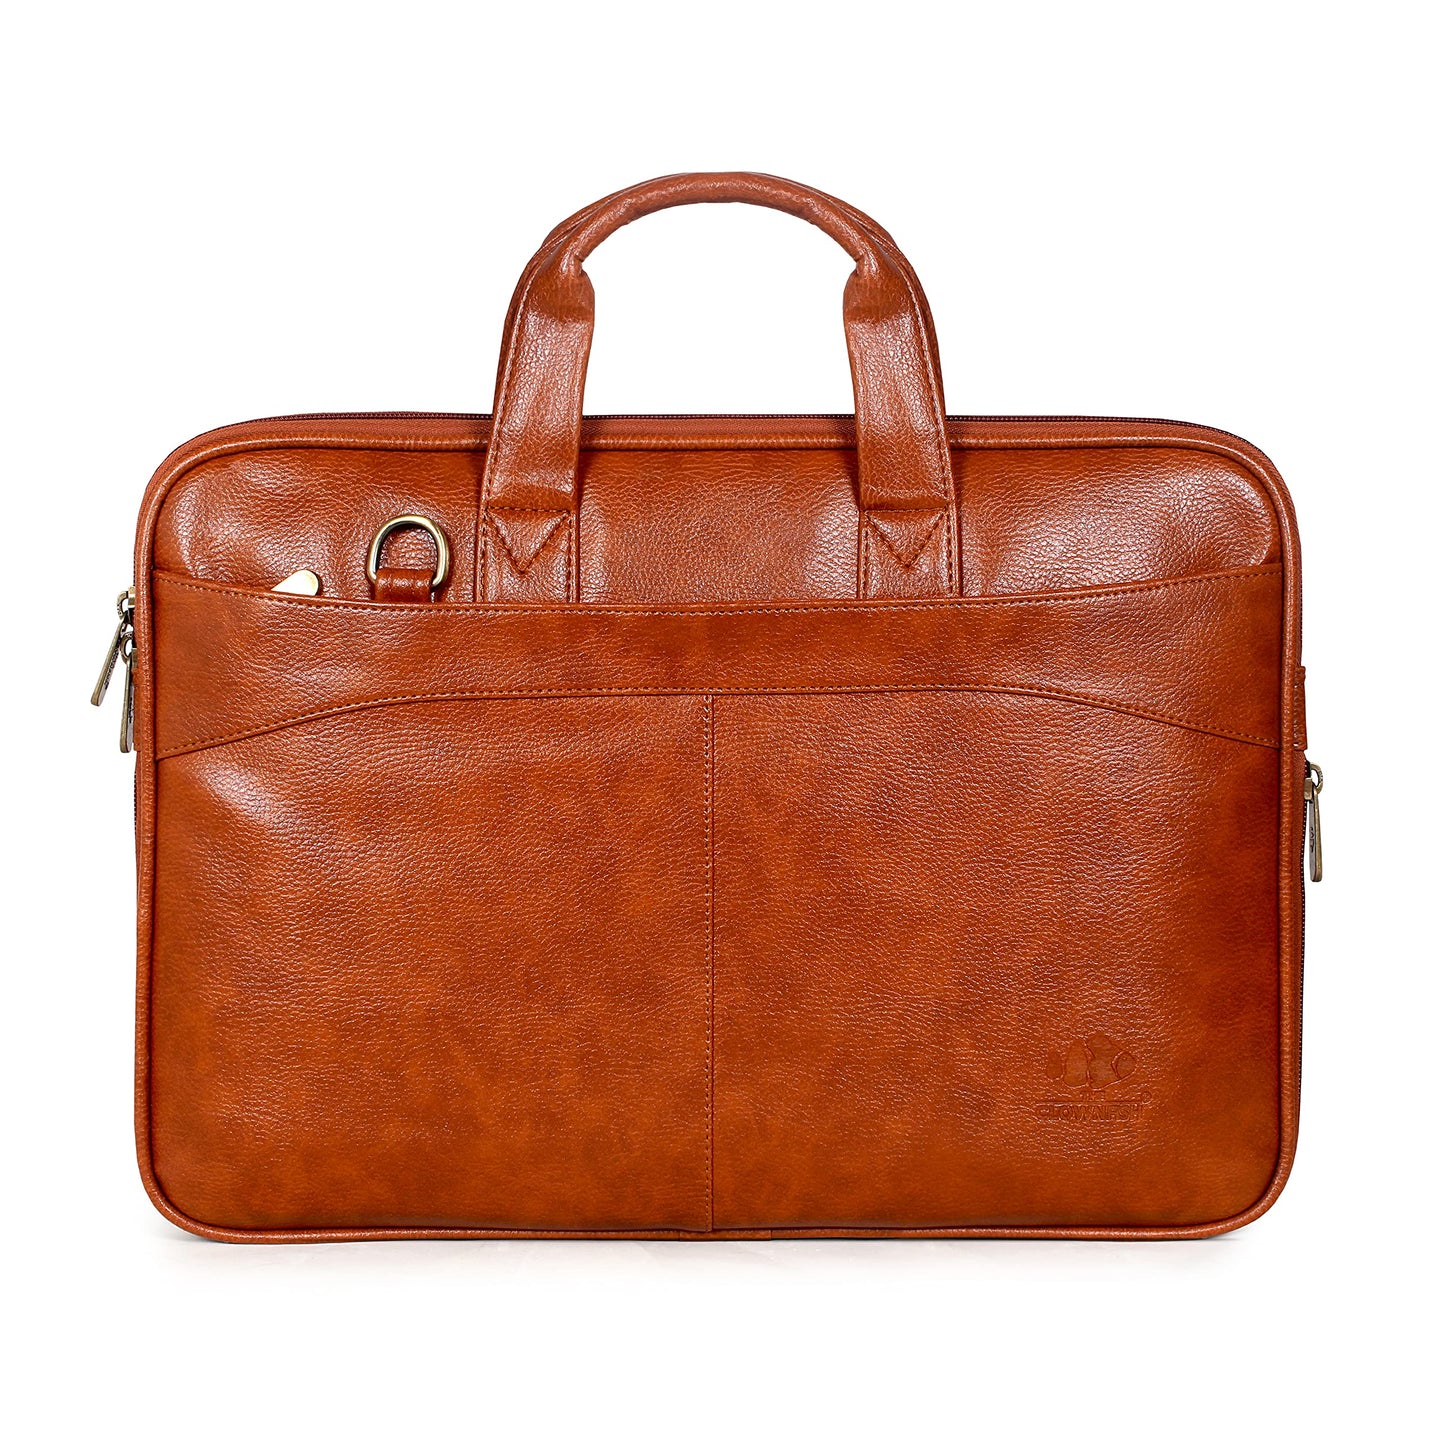 THE CLOWNFISH Glamour Faux Leather Slim Expandable 12 inch Laptop Messenger Bag Briefcase (Tan)